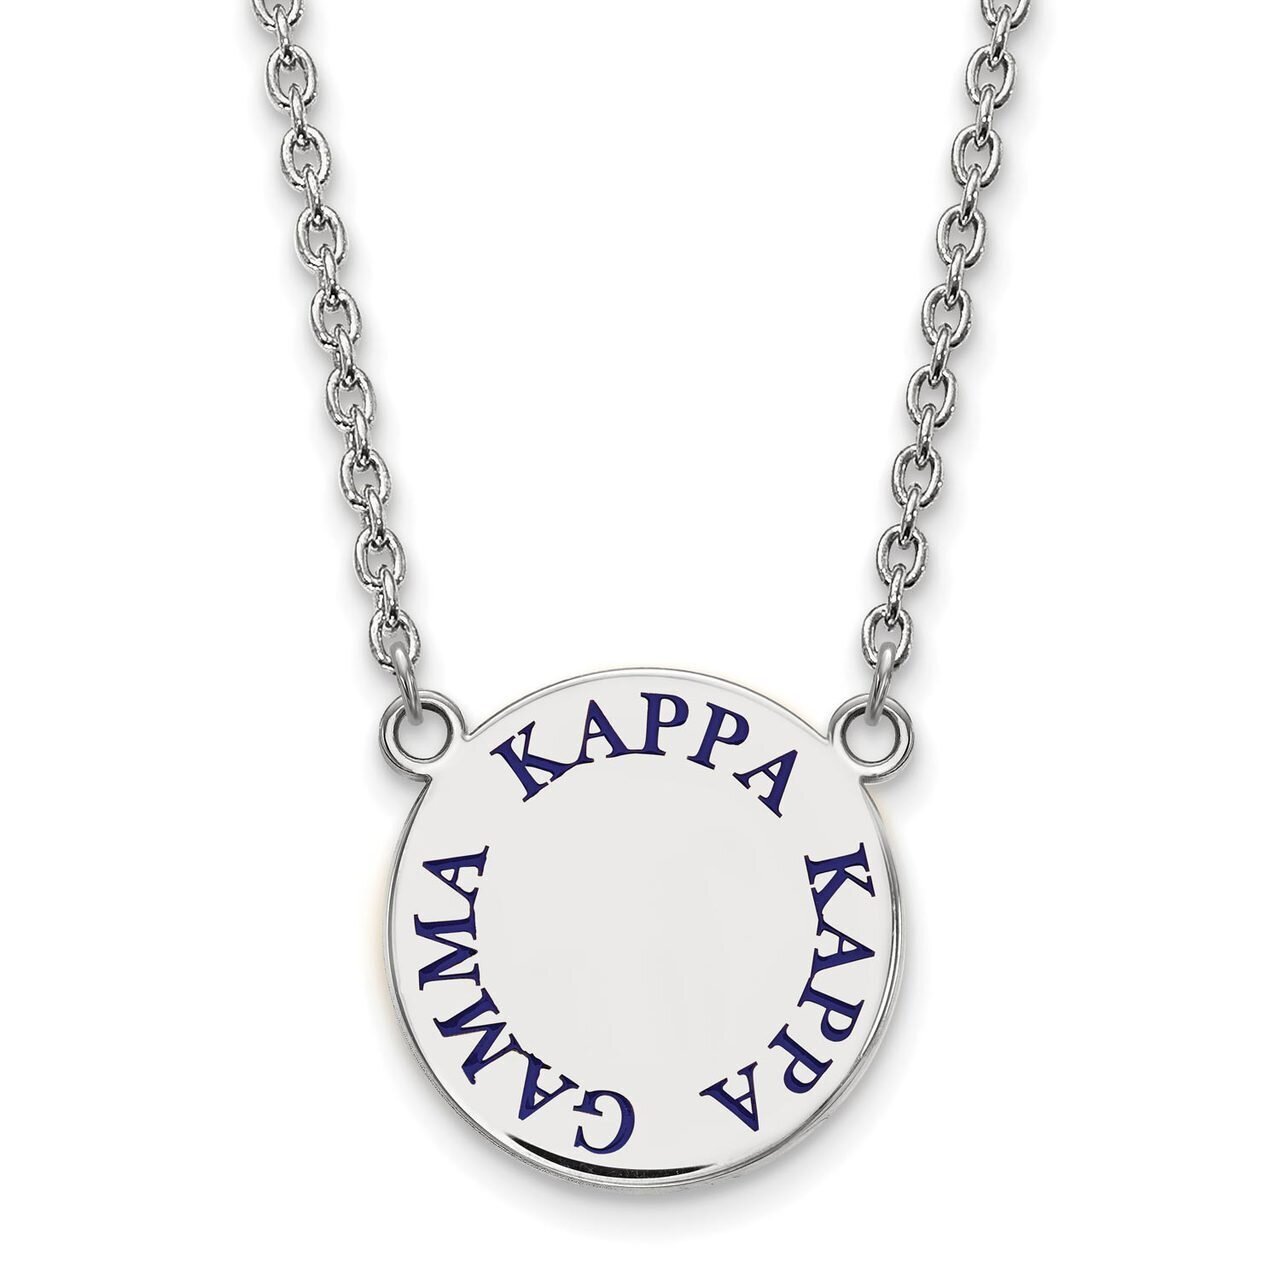 Kappa Kappa Gamma Small Enameled Pendant with 18 Inch Chain Sterling Silver SS015KKG-18